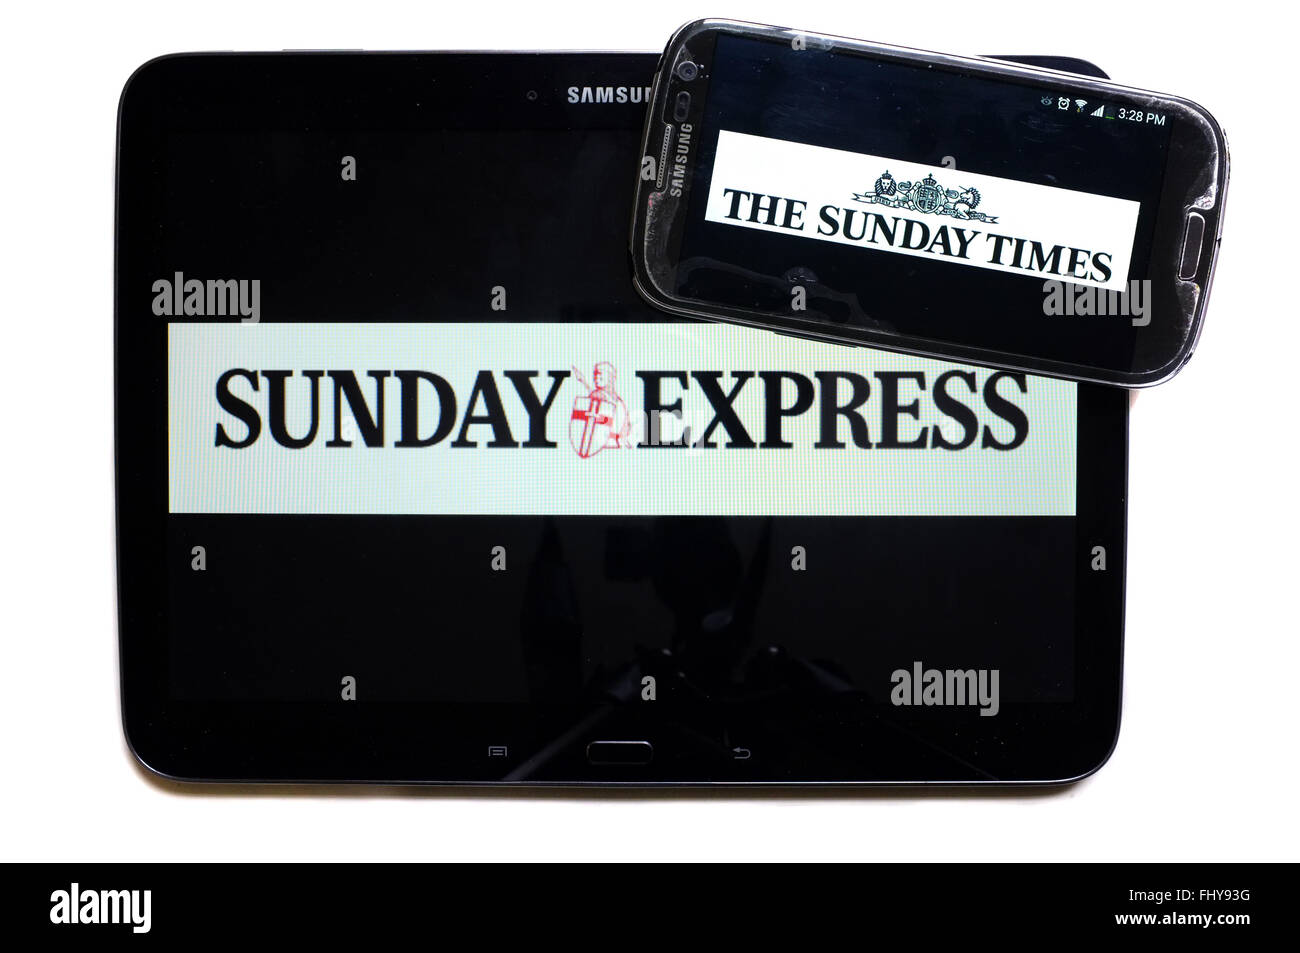 The logos of the Sunday Express and The Sunday Times newspapers displayed on the screens of a tablet and a smartphone. Stock Photo